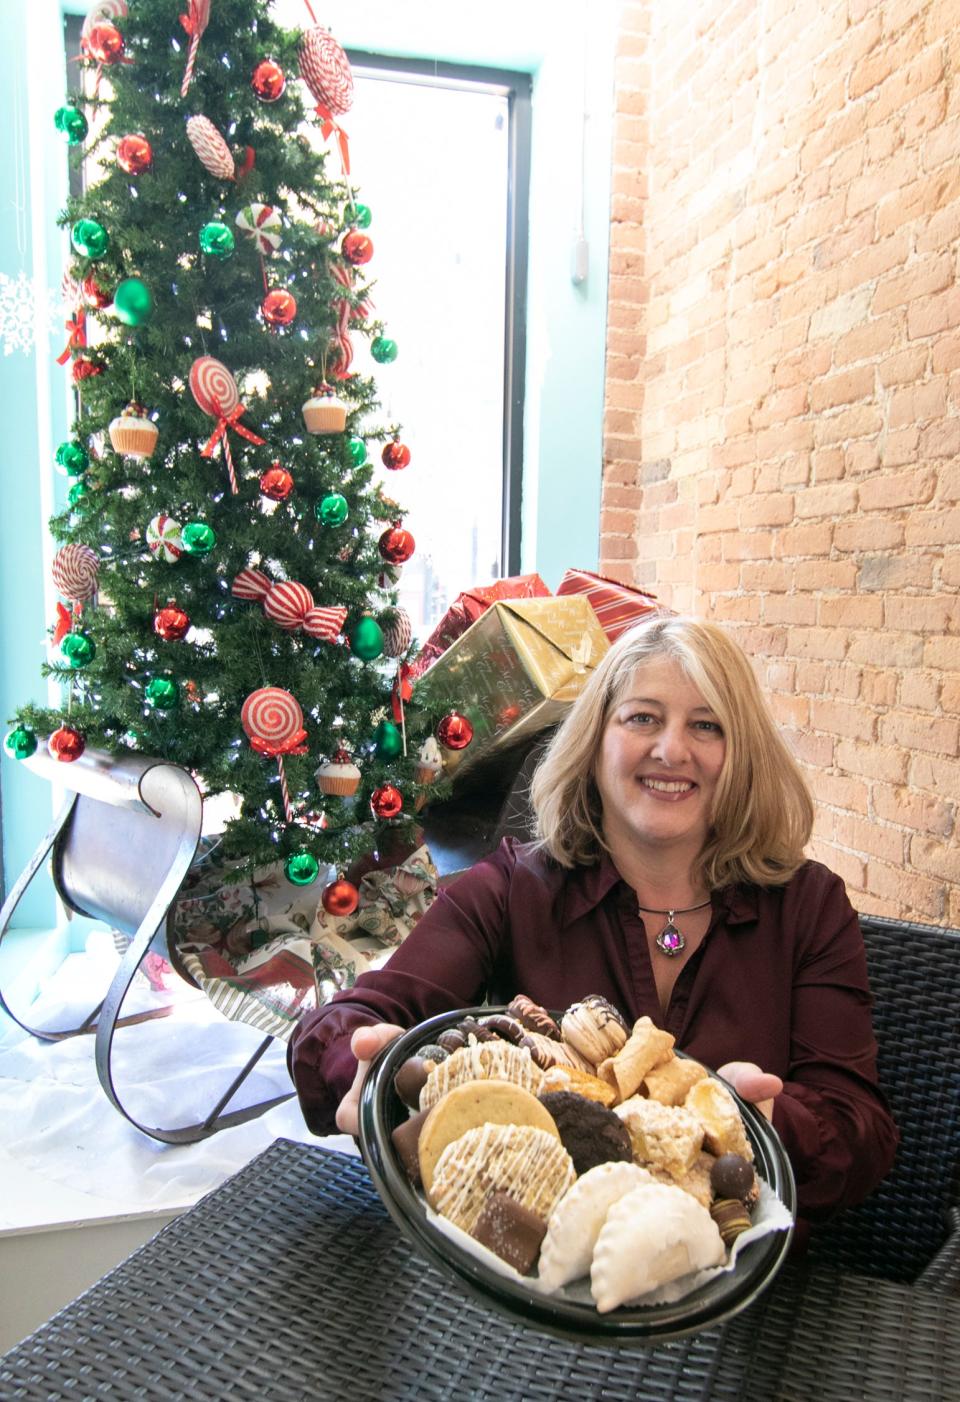 Teresa Chalifour, owner of The Chocolate Boutique and Bakery, holds a sweet tray sampling in her downtown Howell store Tuesday, Nov. 23, 2021. On the tray are hand pies, cookies, truffles, lemon bars, pumpkin roll slices, mini cannoli, French macarons and assorted chocolates.